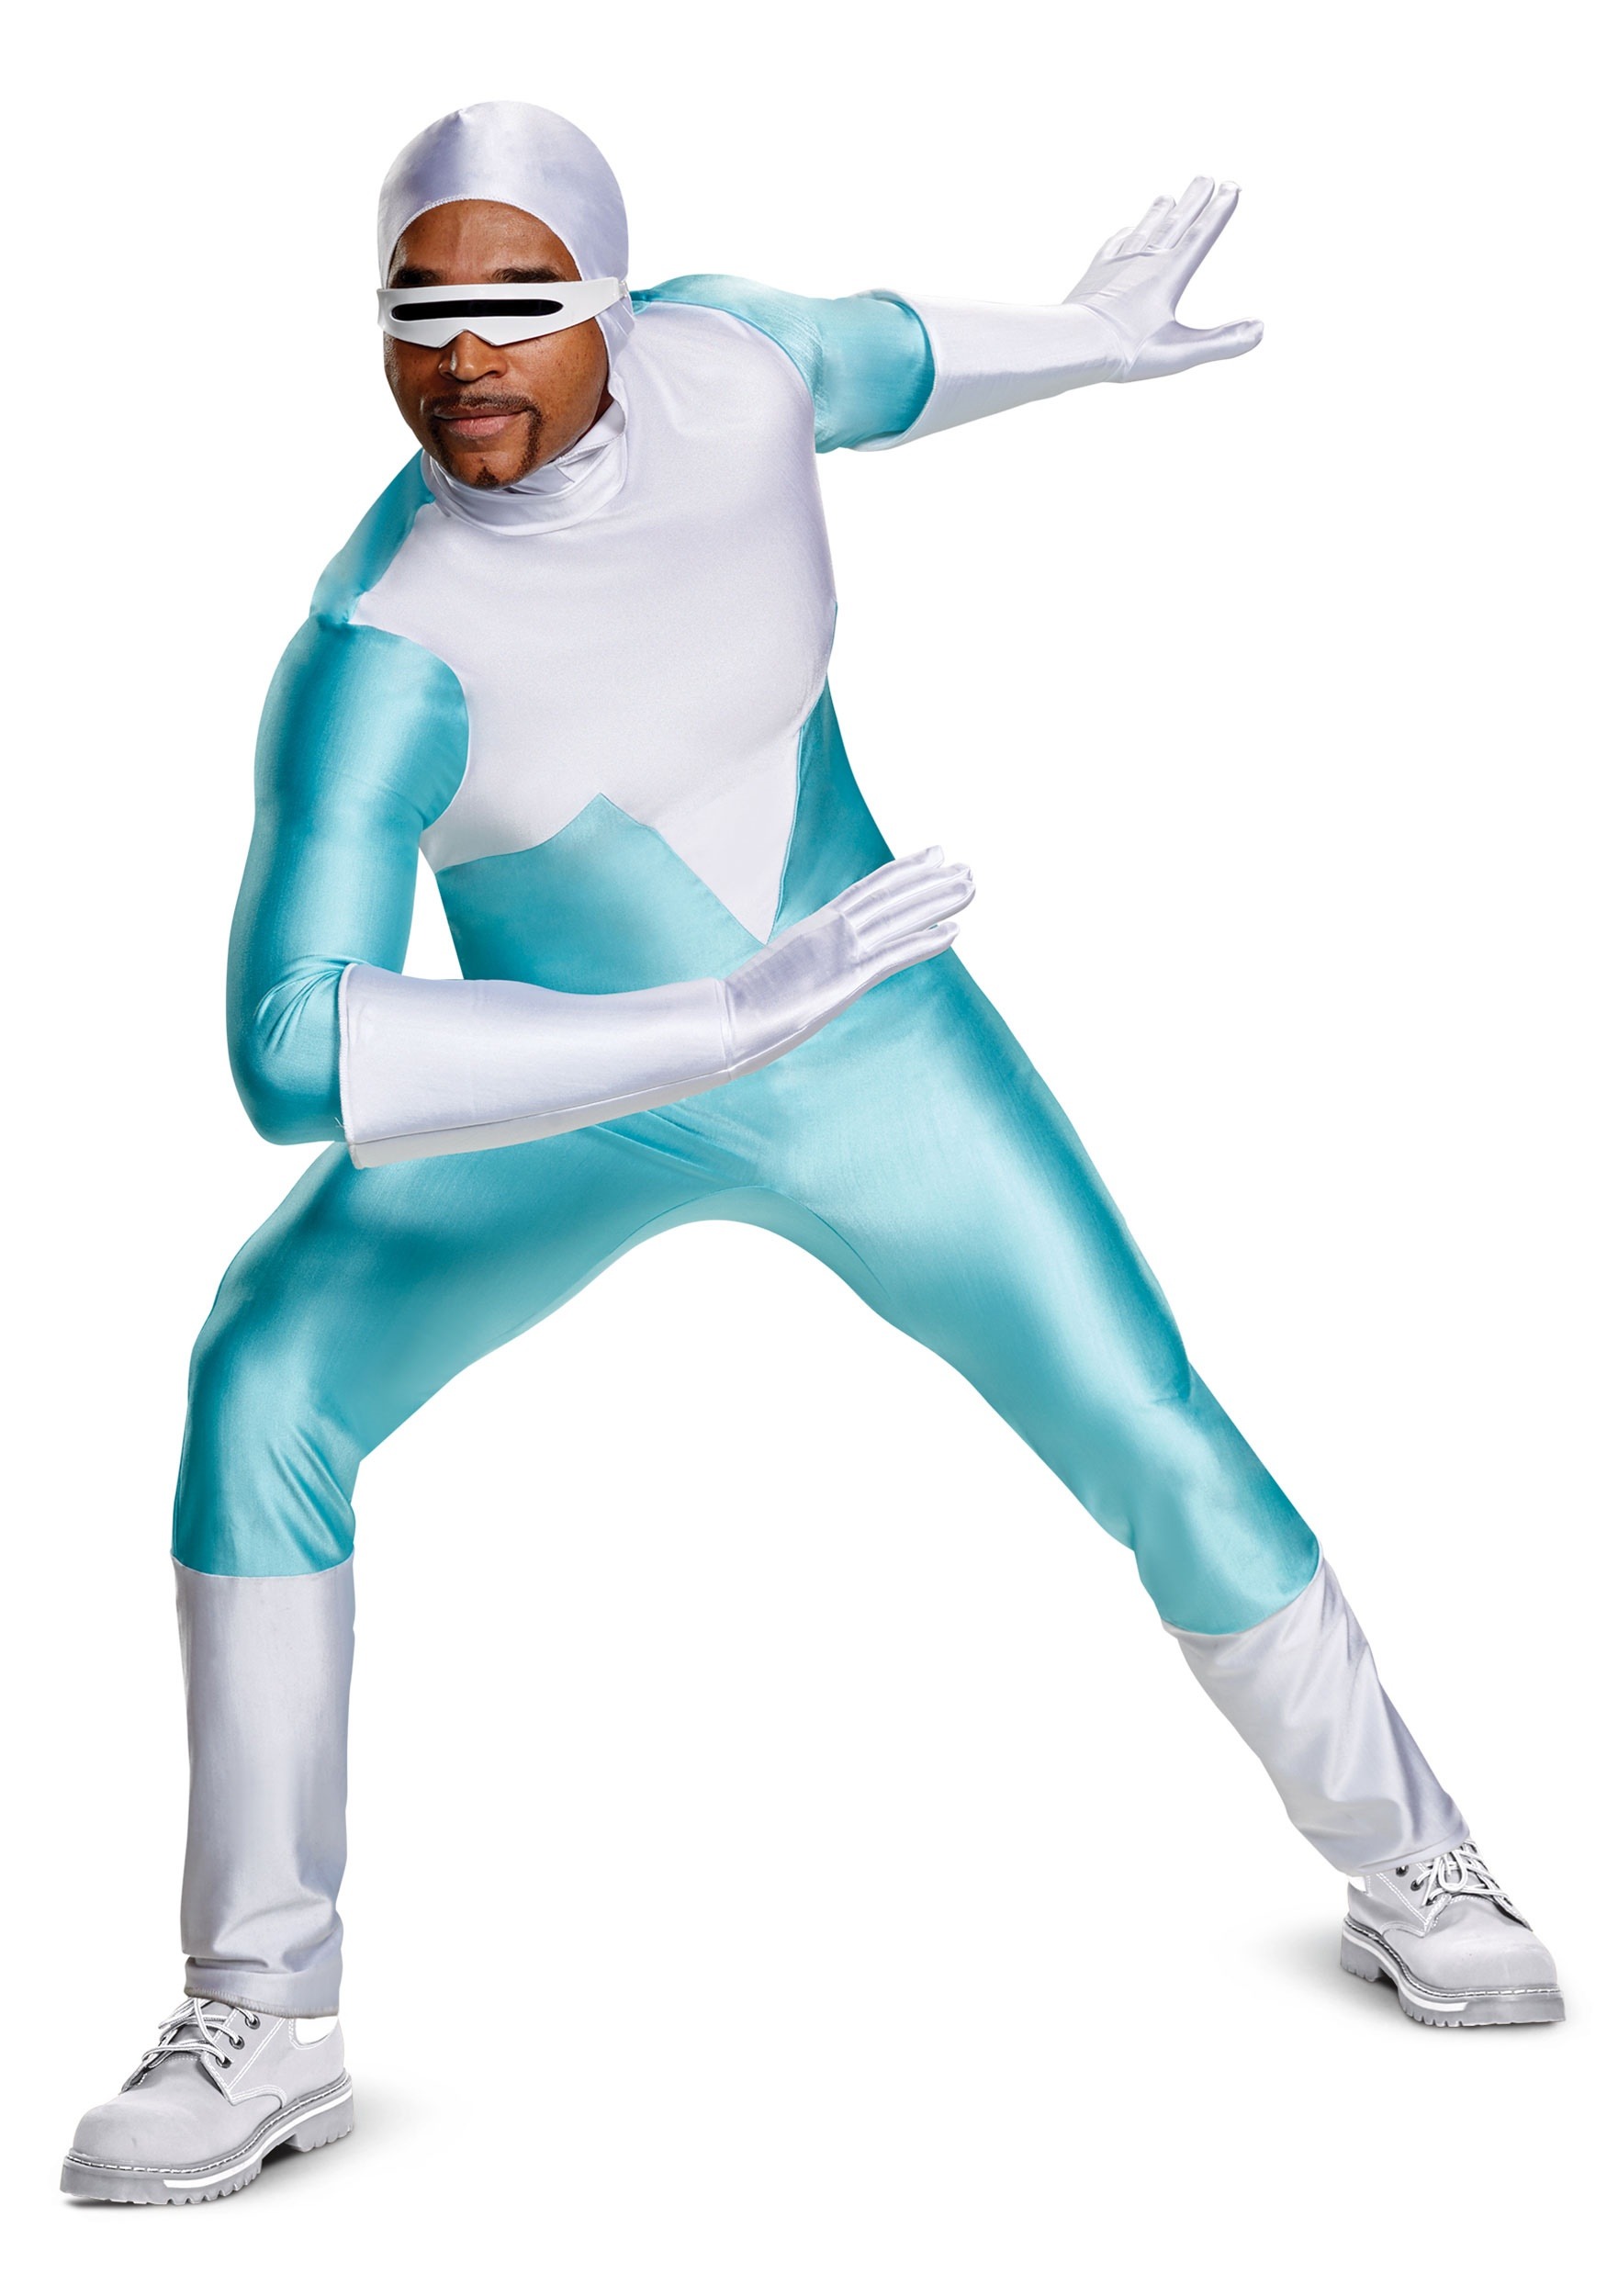 Photos - Fancy Dress Disney Disguise Incredibles 2 Deluxe Frozone Costume for Men Blue/White DI668 